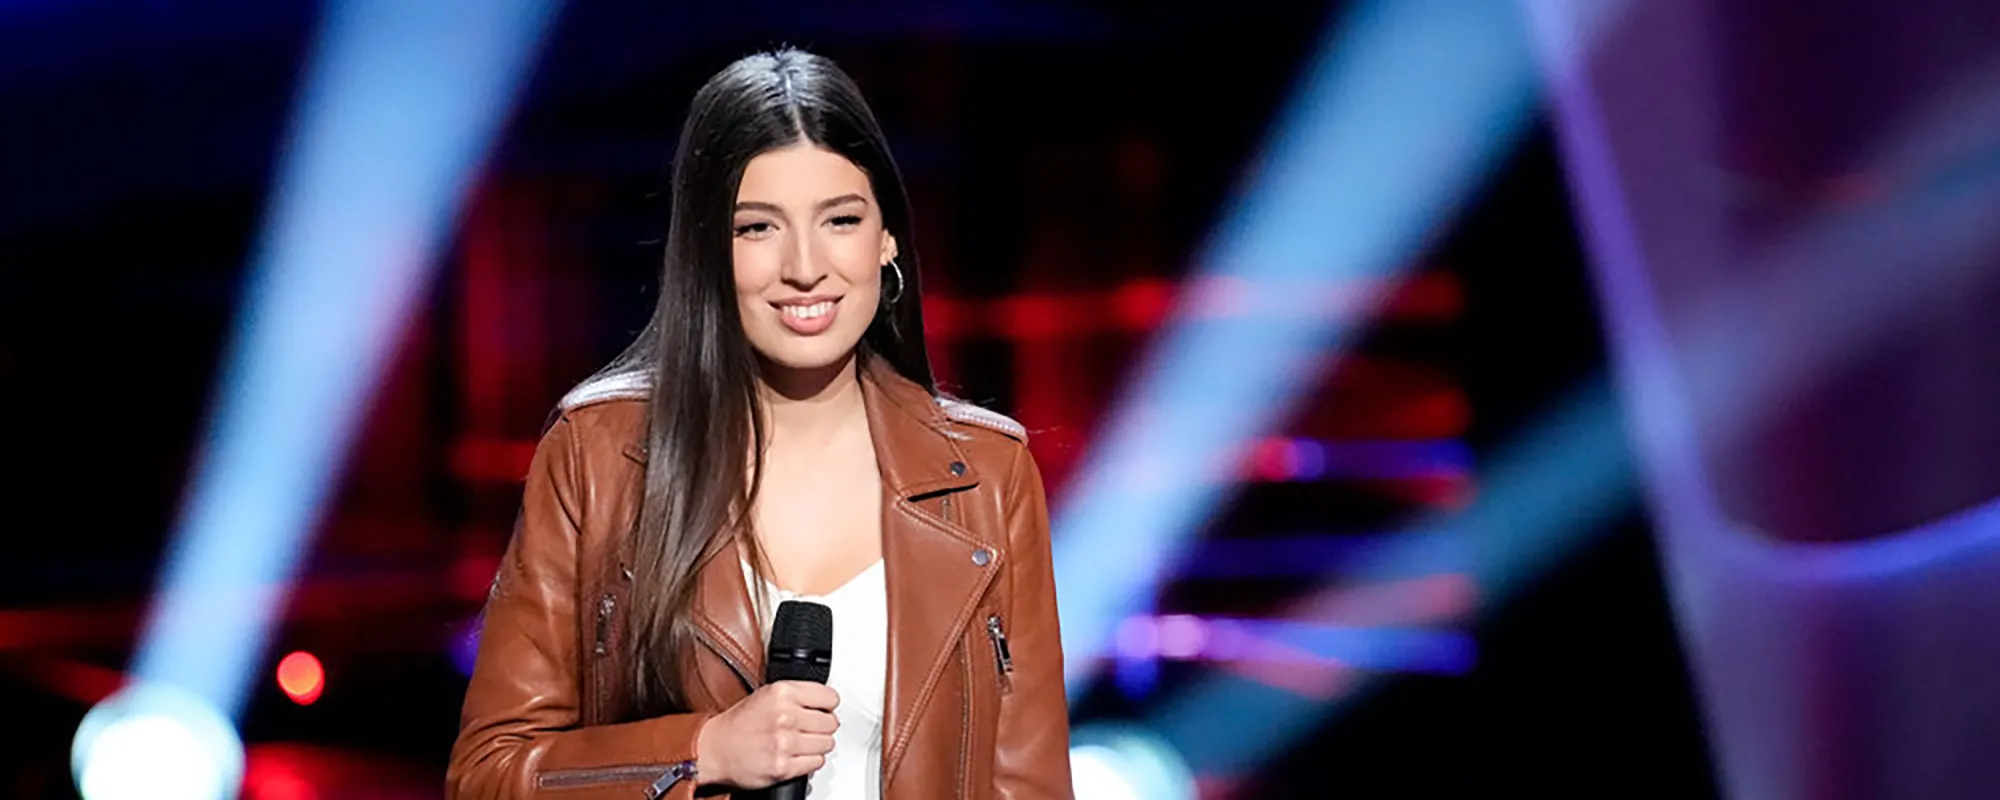 Angelina Nazarian Wows with Kelly Clarkson’s “The Trouble With Love Is” on ‘The Voice’